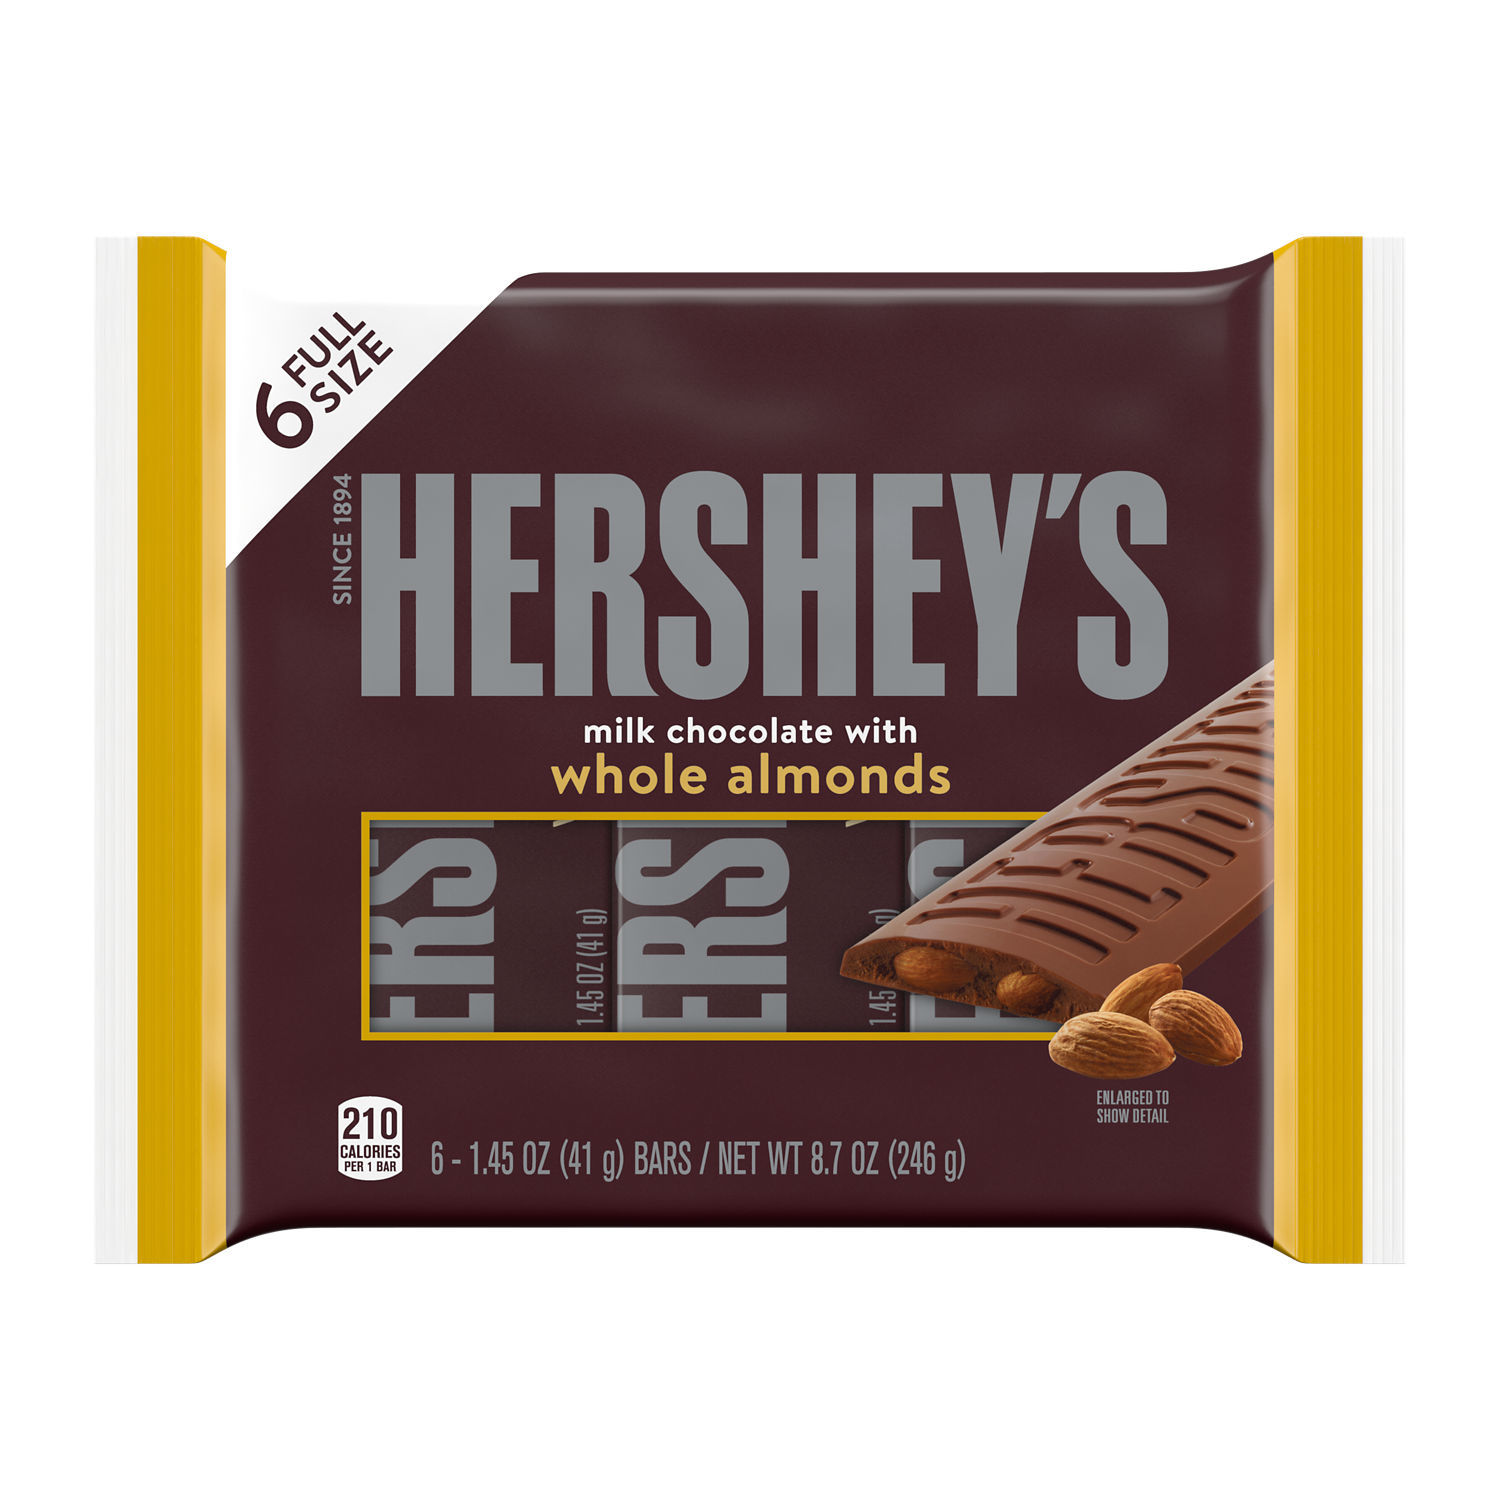 Hershey's Milk Chocolate with Whole Almonds Candy, Bars 1.45 oz, 6 Count - image 2 of 9